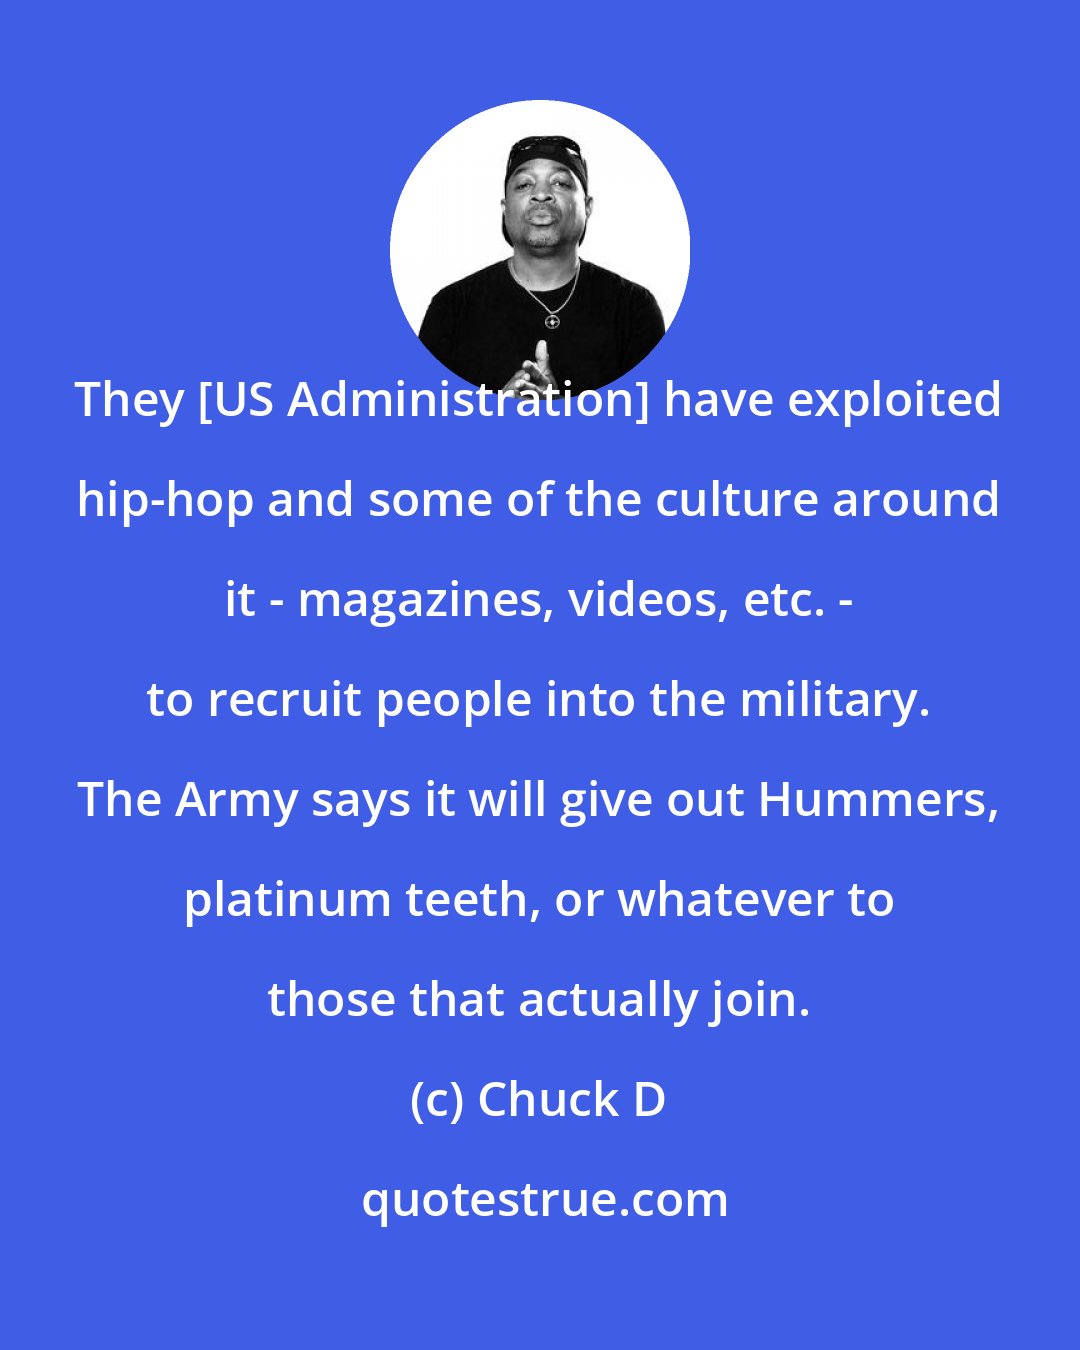 Chuck D: They [US Administration] have exploited hip-hop and some of the culture around it - magazines, videos, etc. - to recruit people into the military. The Army says it will give out Hummers, platinum teeth, or whatever to those that actually join.